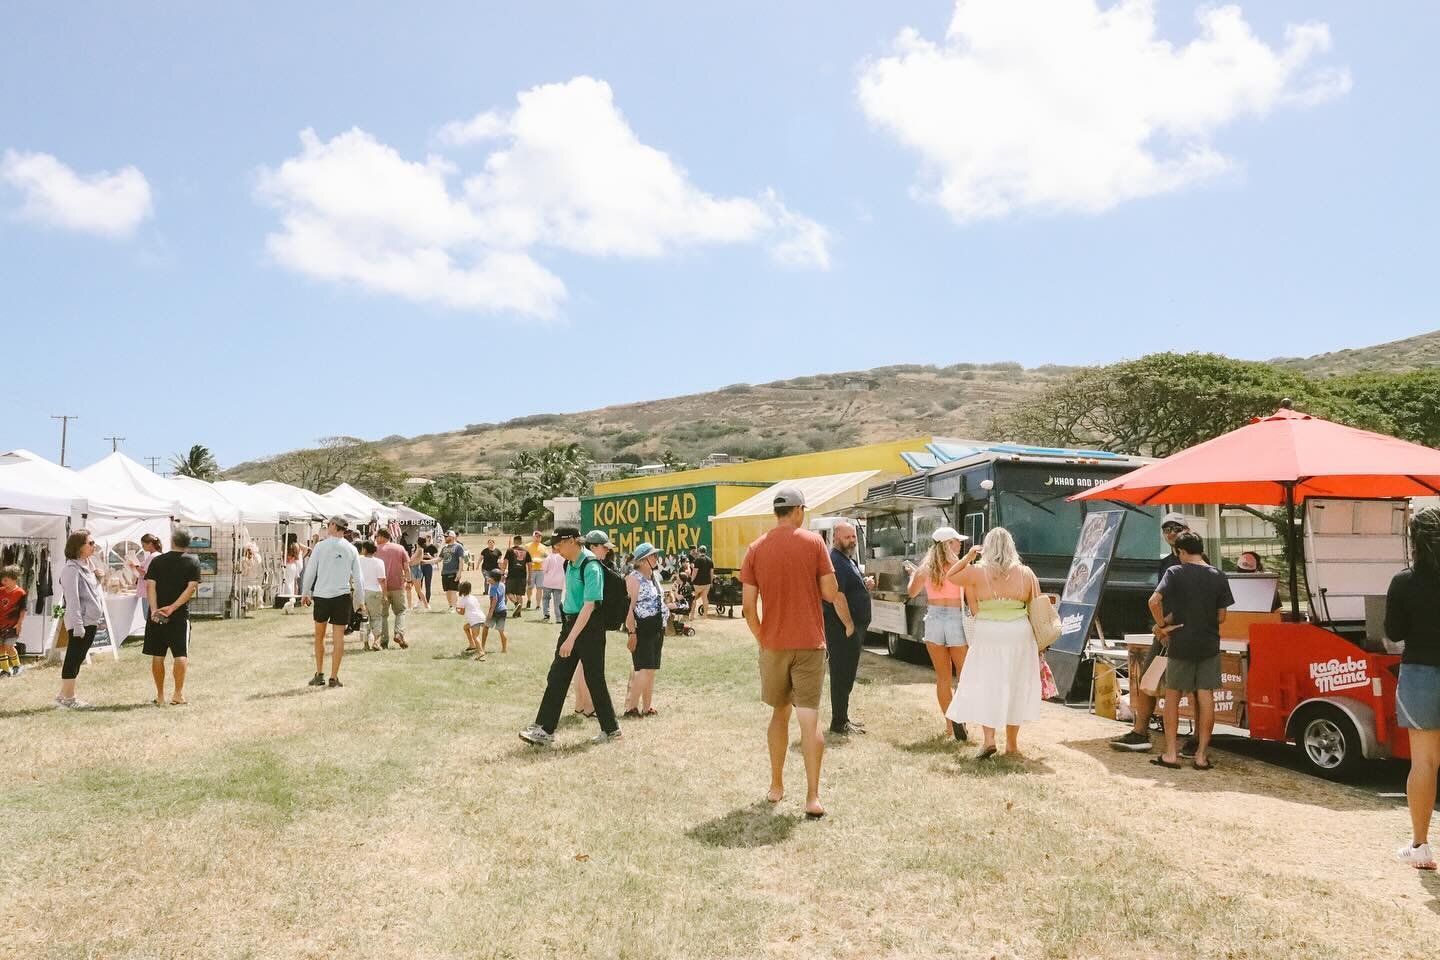 M A H A L O to all of our amazing market attendees, makers, and supporters for making yesterday&rsquo;s Hawaii Kai Market successful + fun! 🫶🌞💐

We love seeing all of the #localgoods you went home with 📸😍 Be sure to save the date! Our Ala Moana 